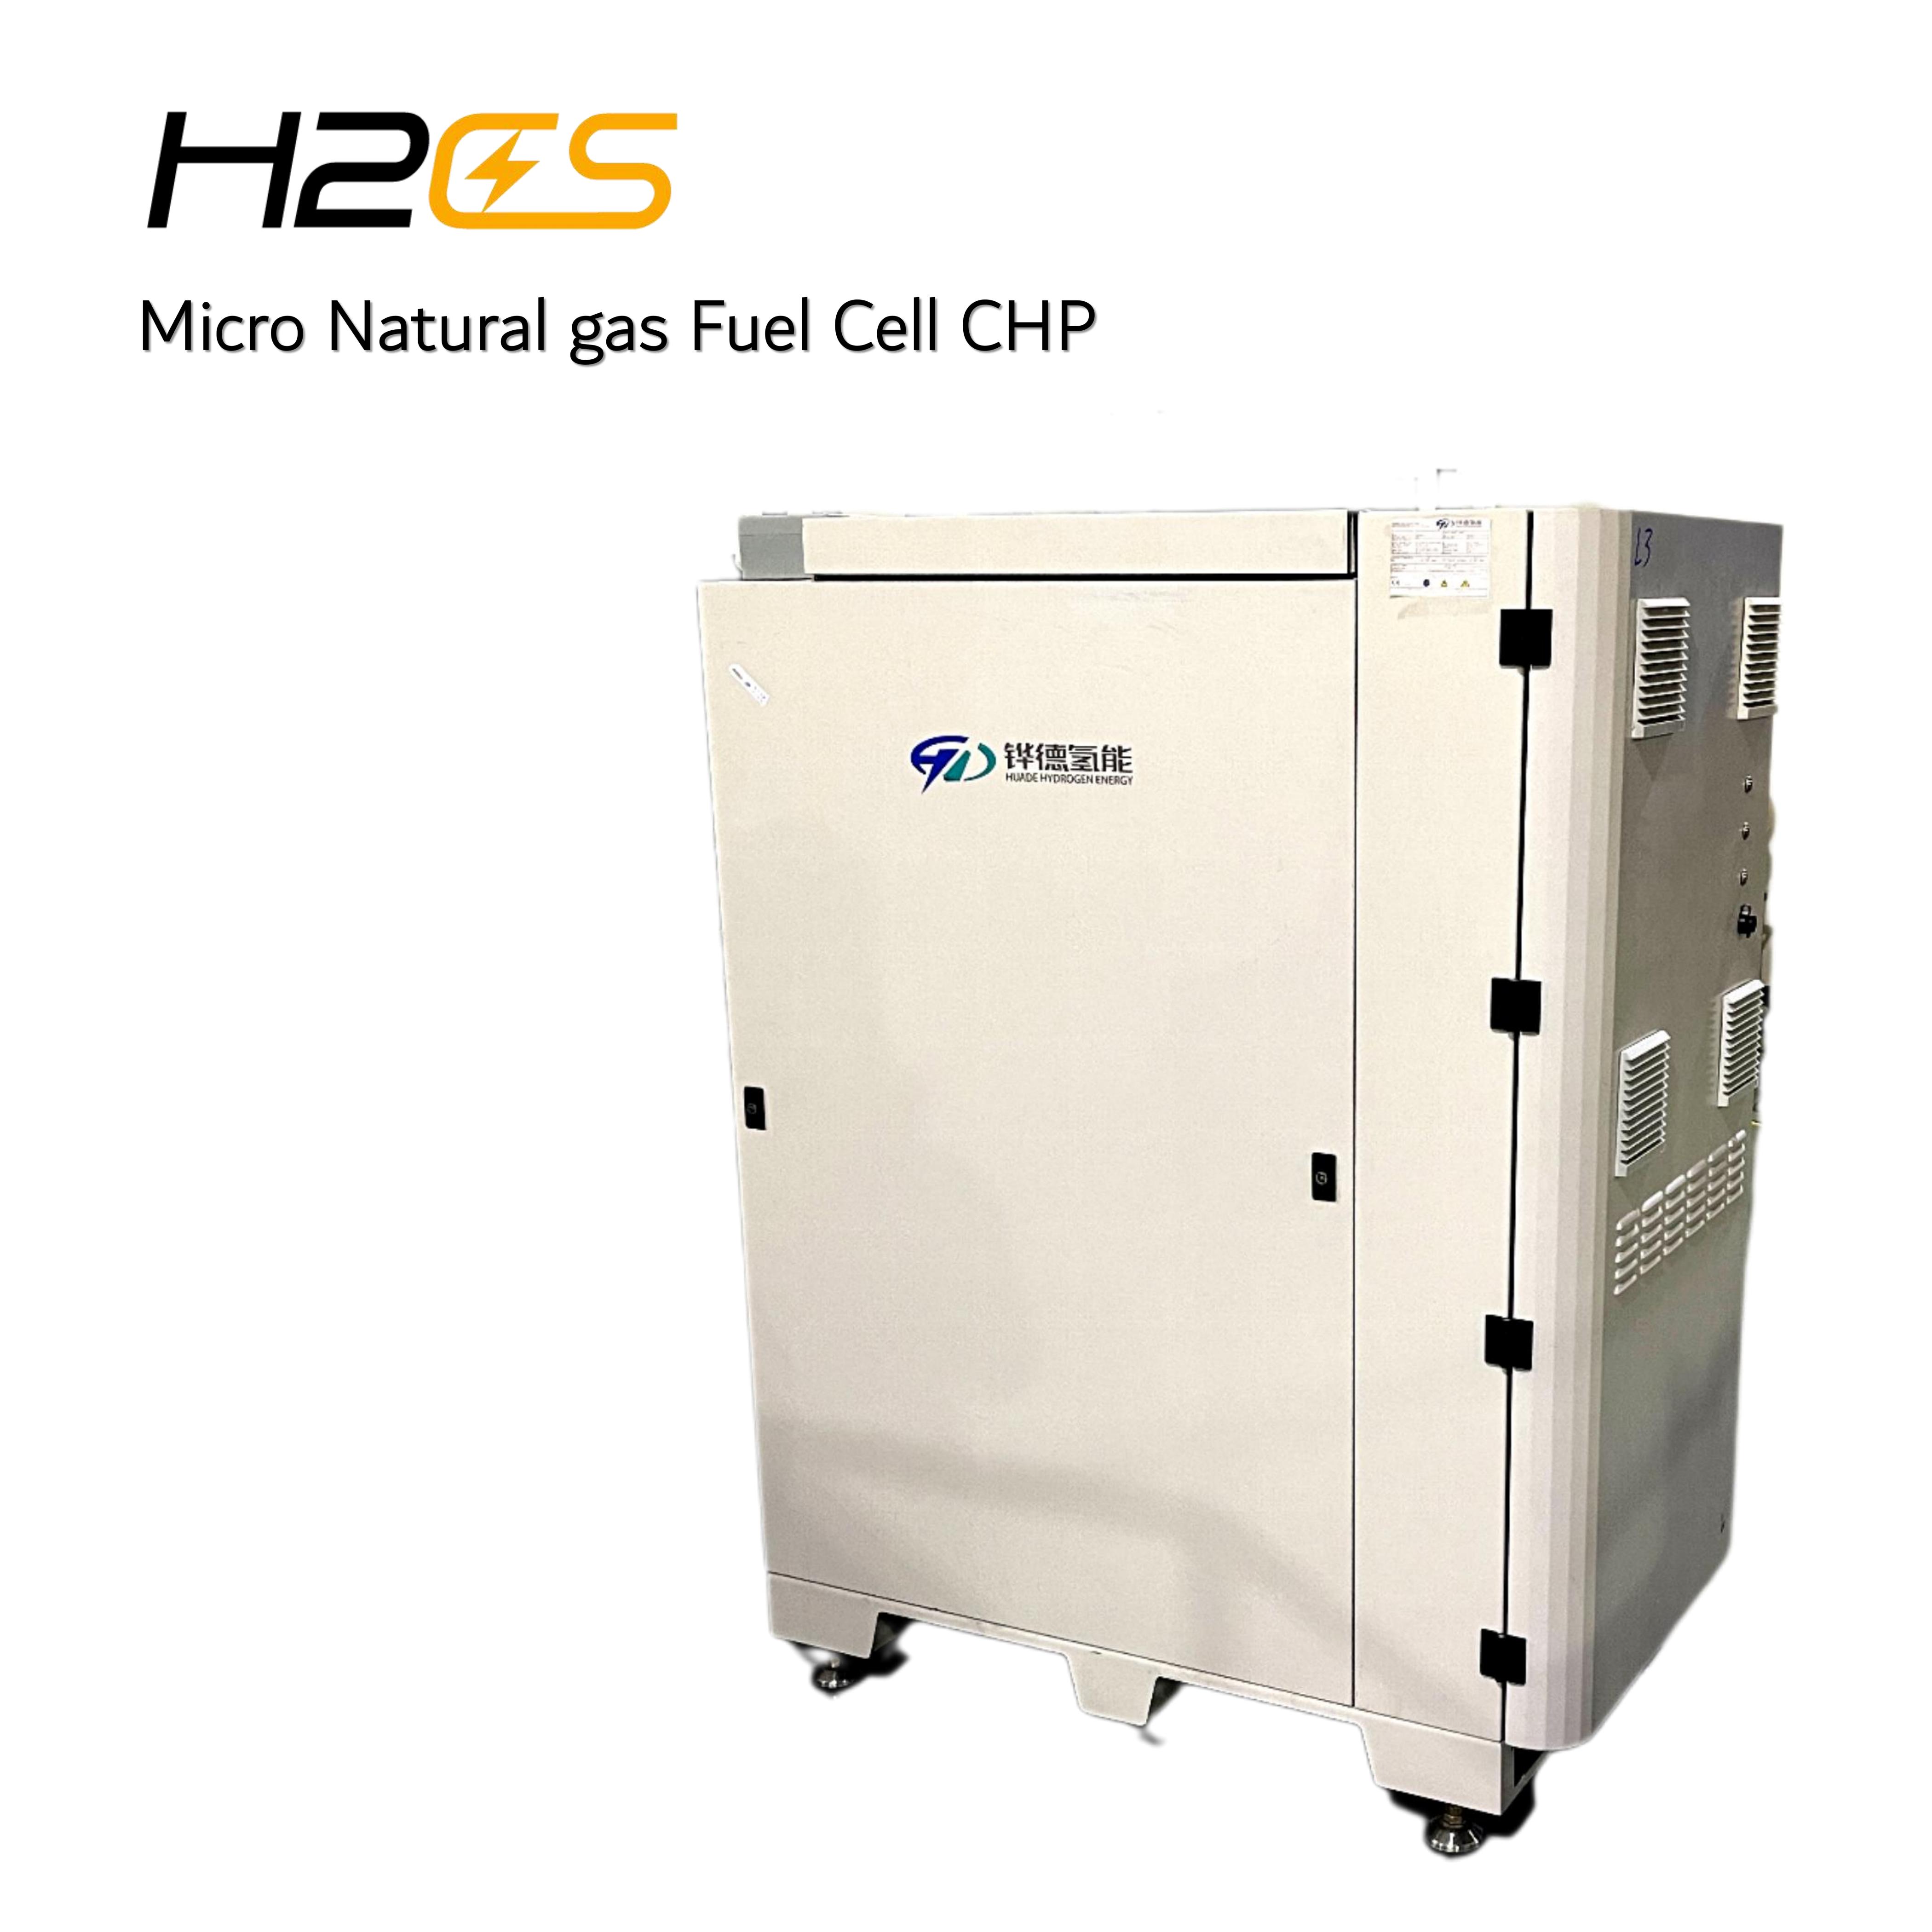 Microgrid Fuel Cell Cooling CHP System